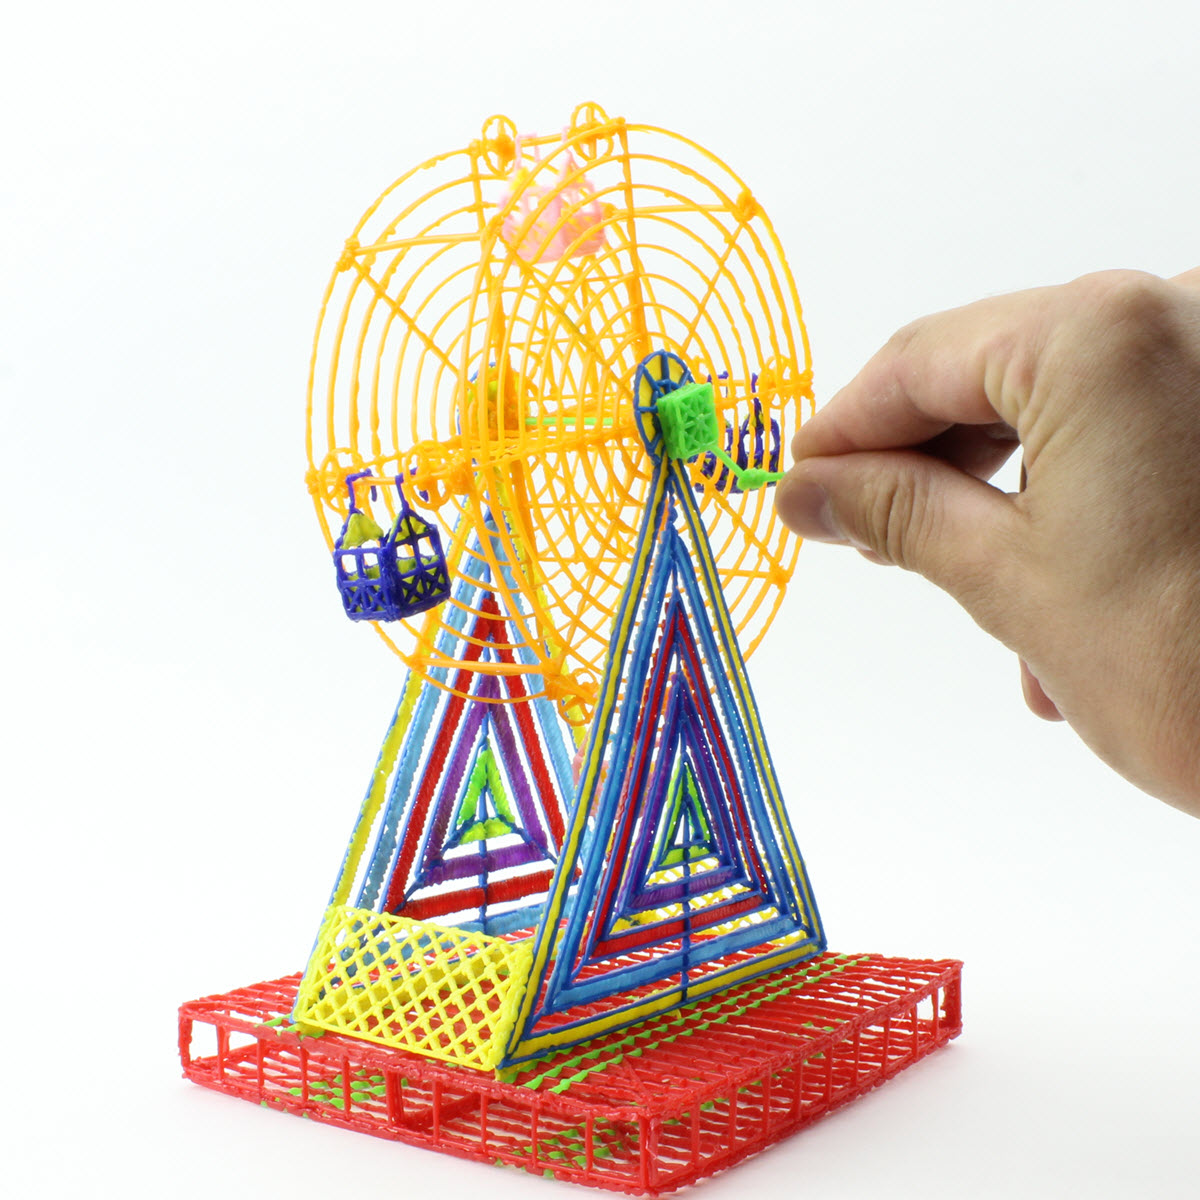 Ferris Wheel made with 3Dmate Design Mat and 3d pen.